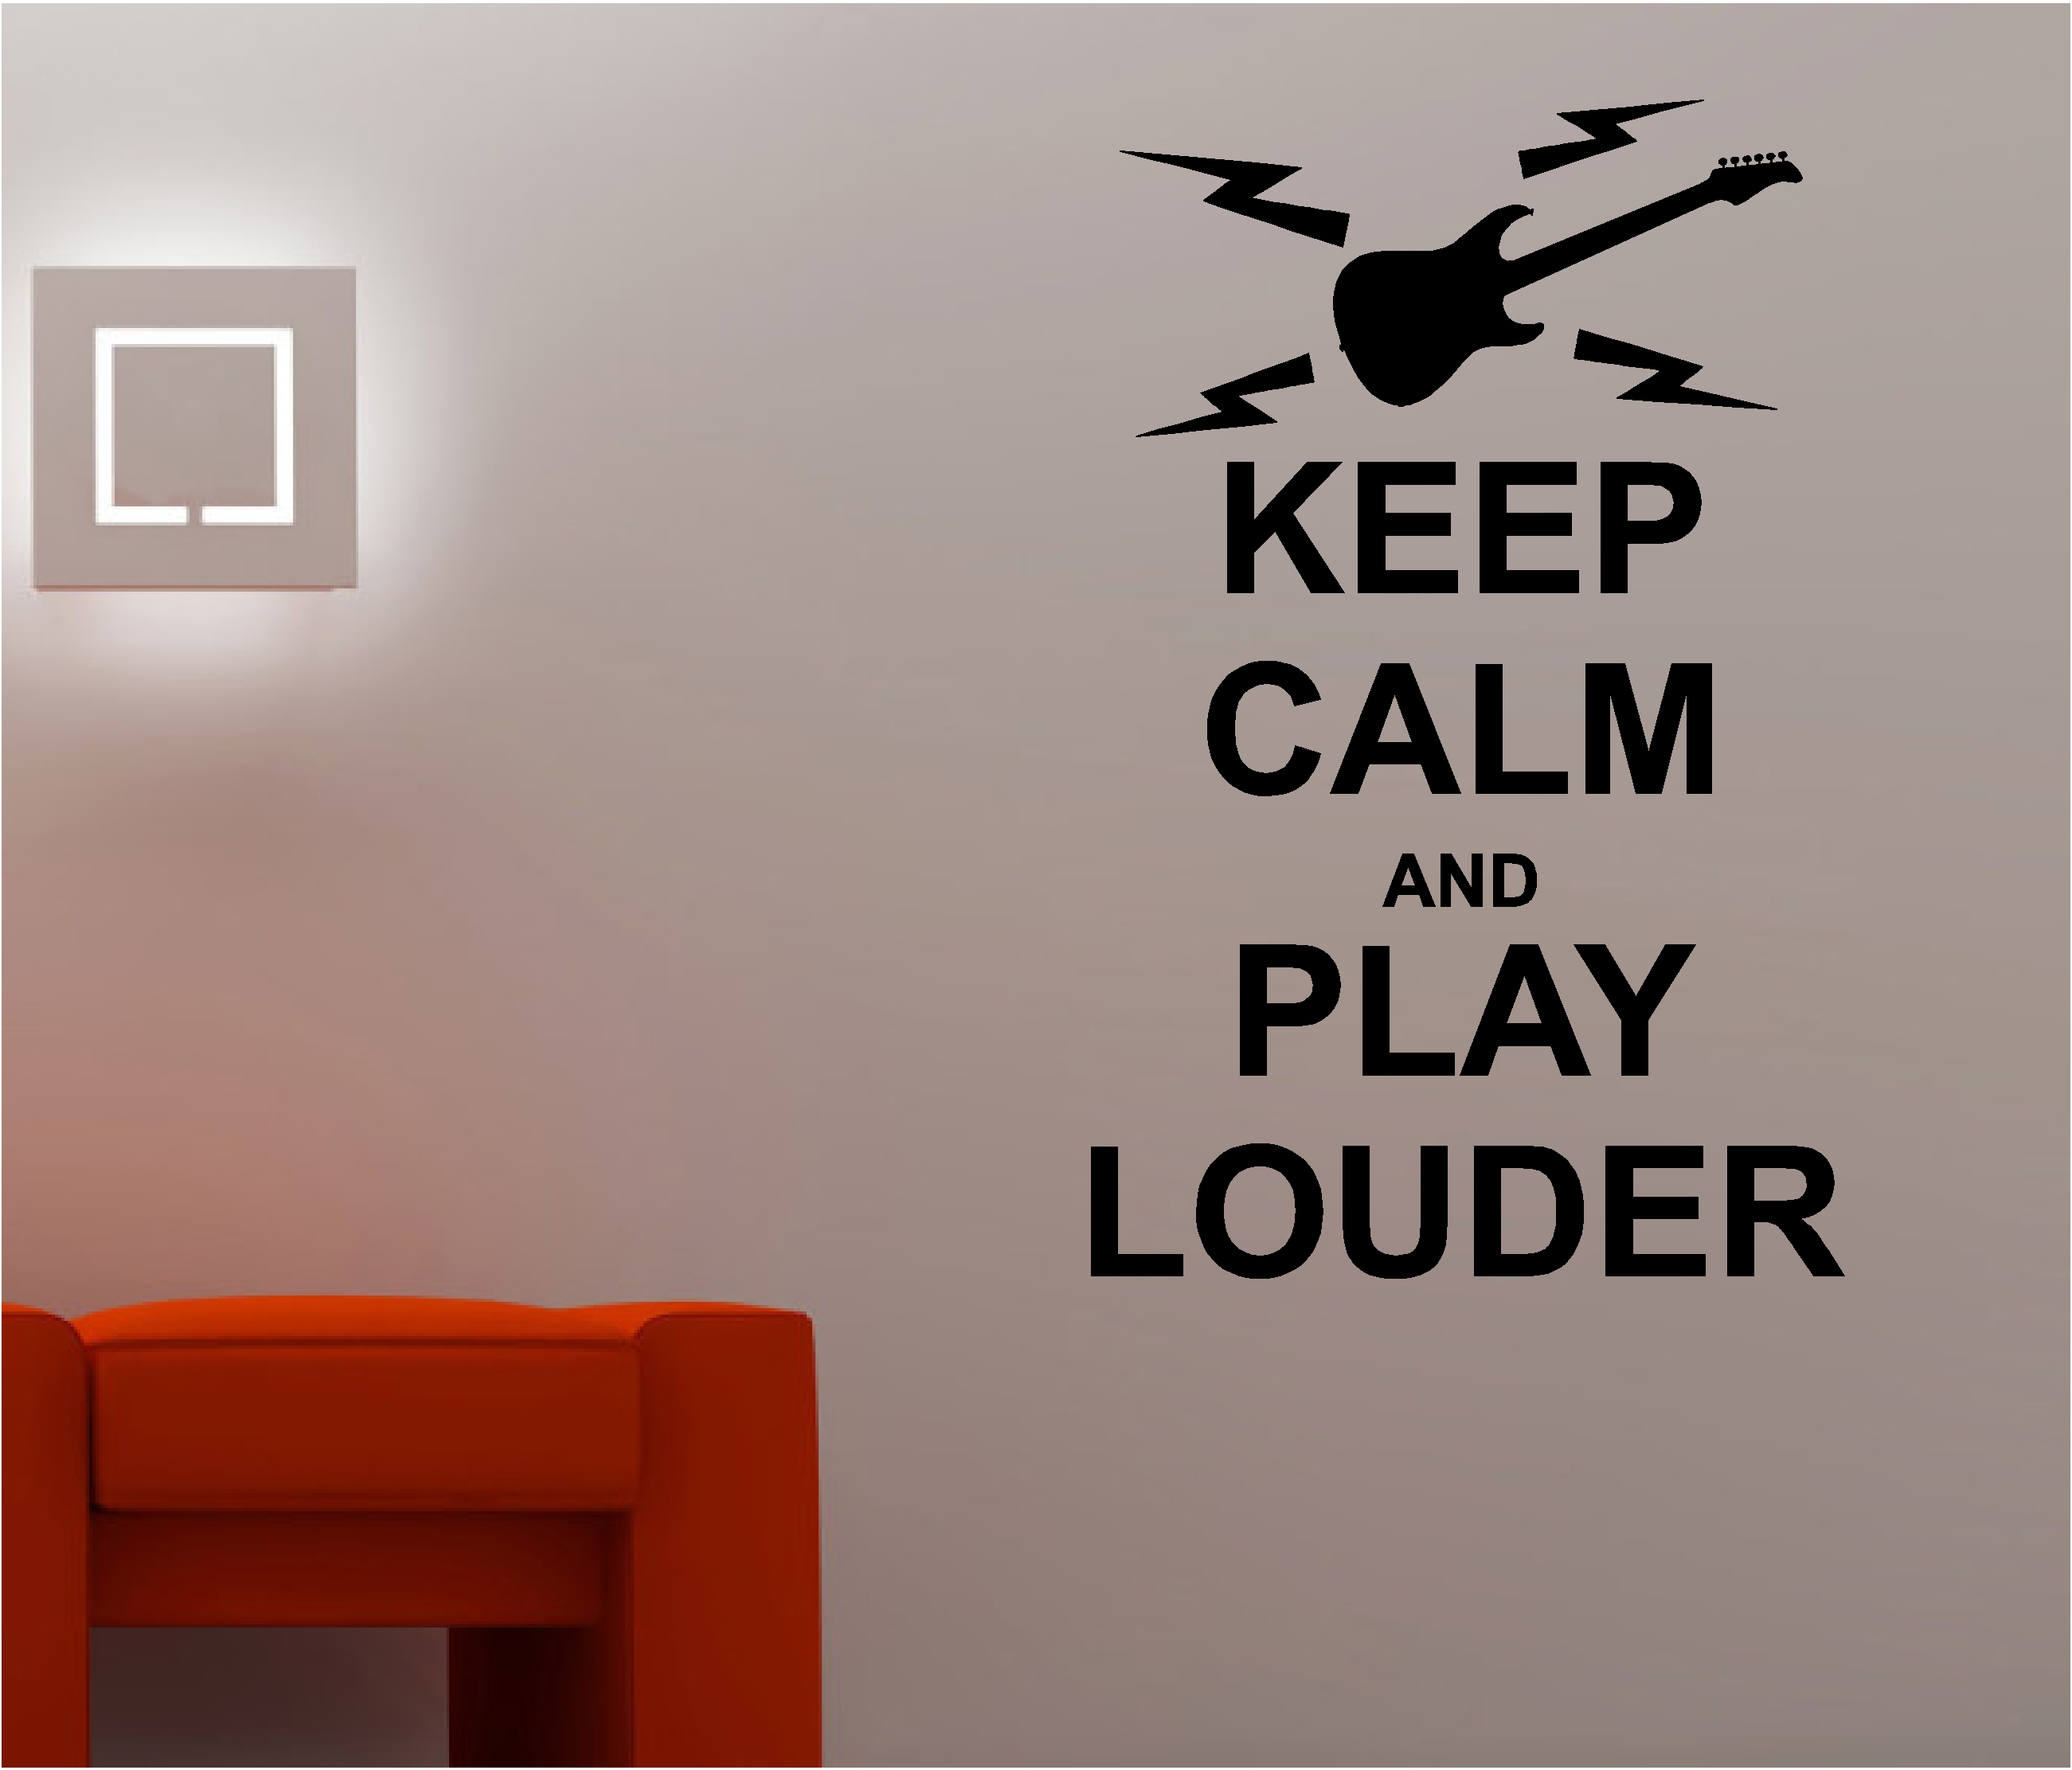 Details About Keep Calm Play Louder Music Wall Art Sticker Quote Decal Bedroom Lounge